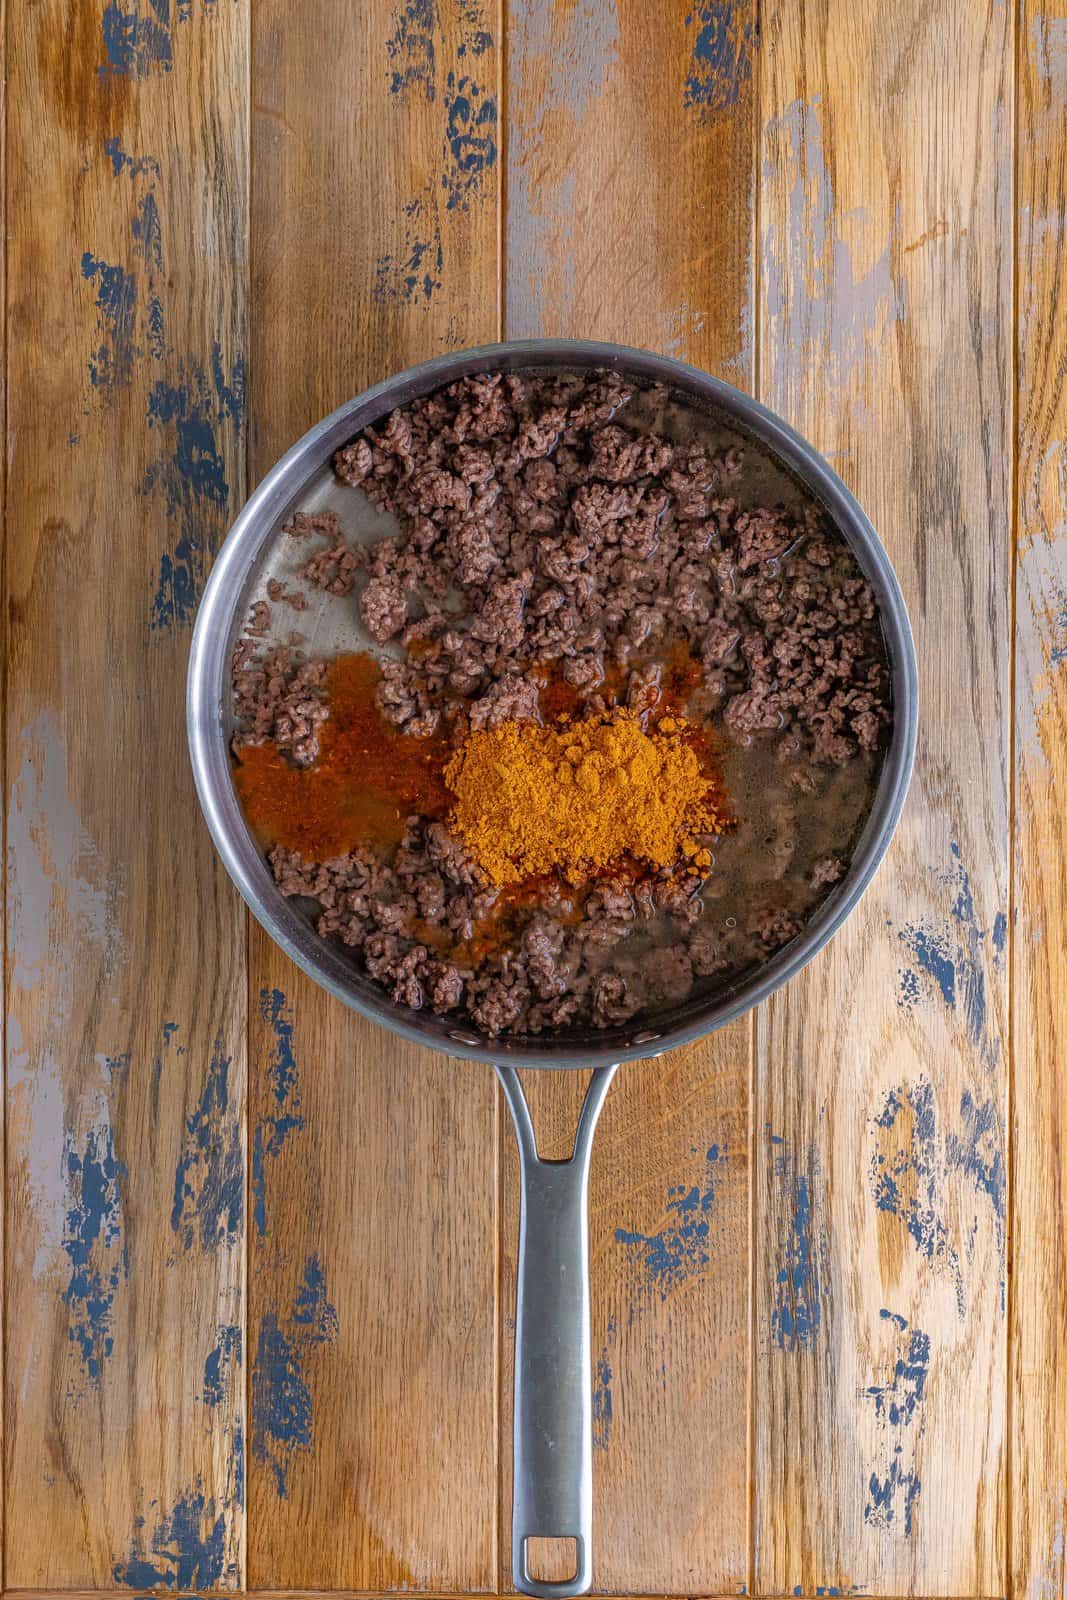 water and taco seasoning  added to cooked ground beef in a skillet.